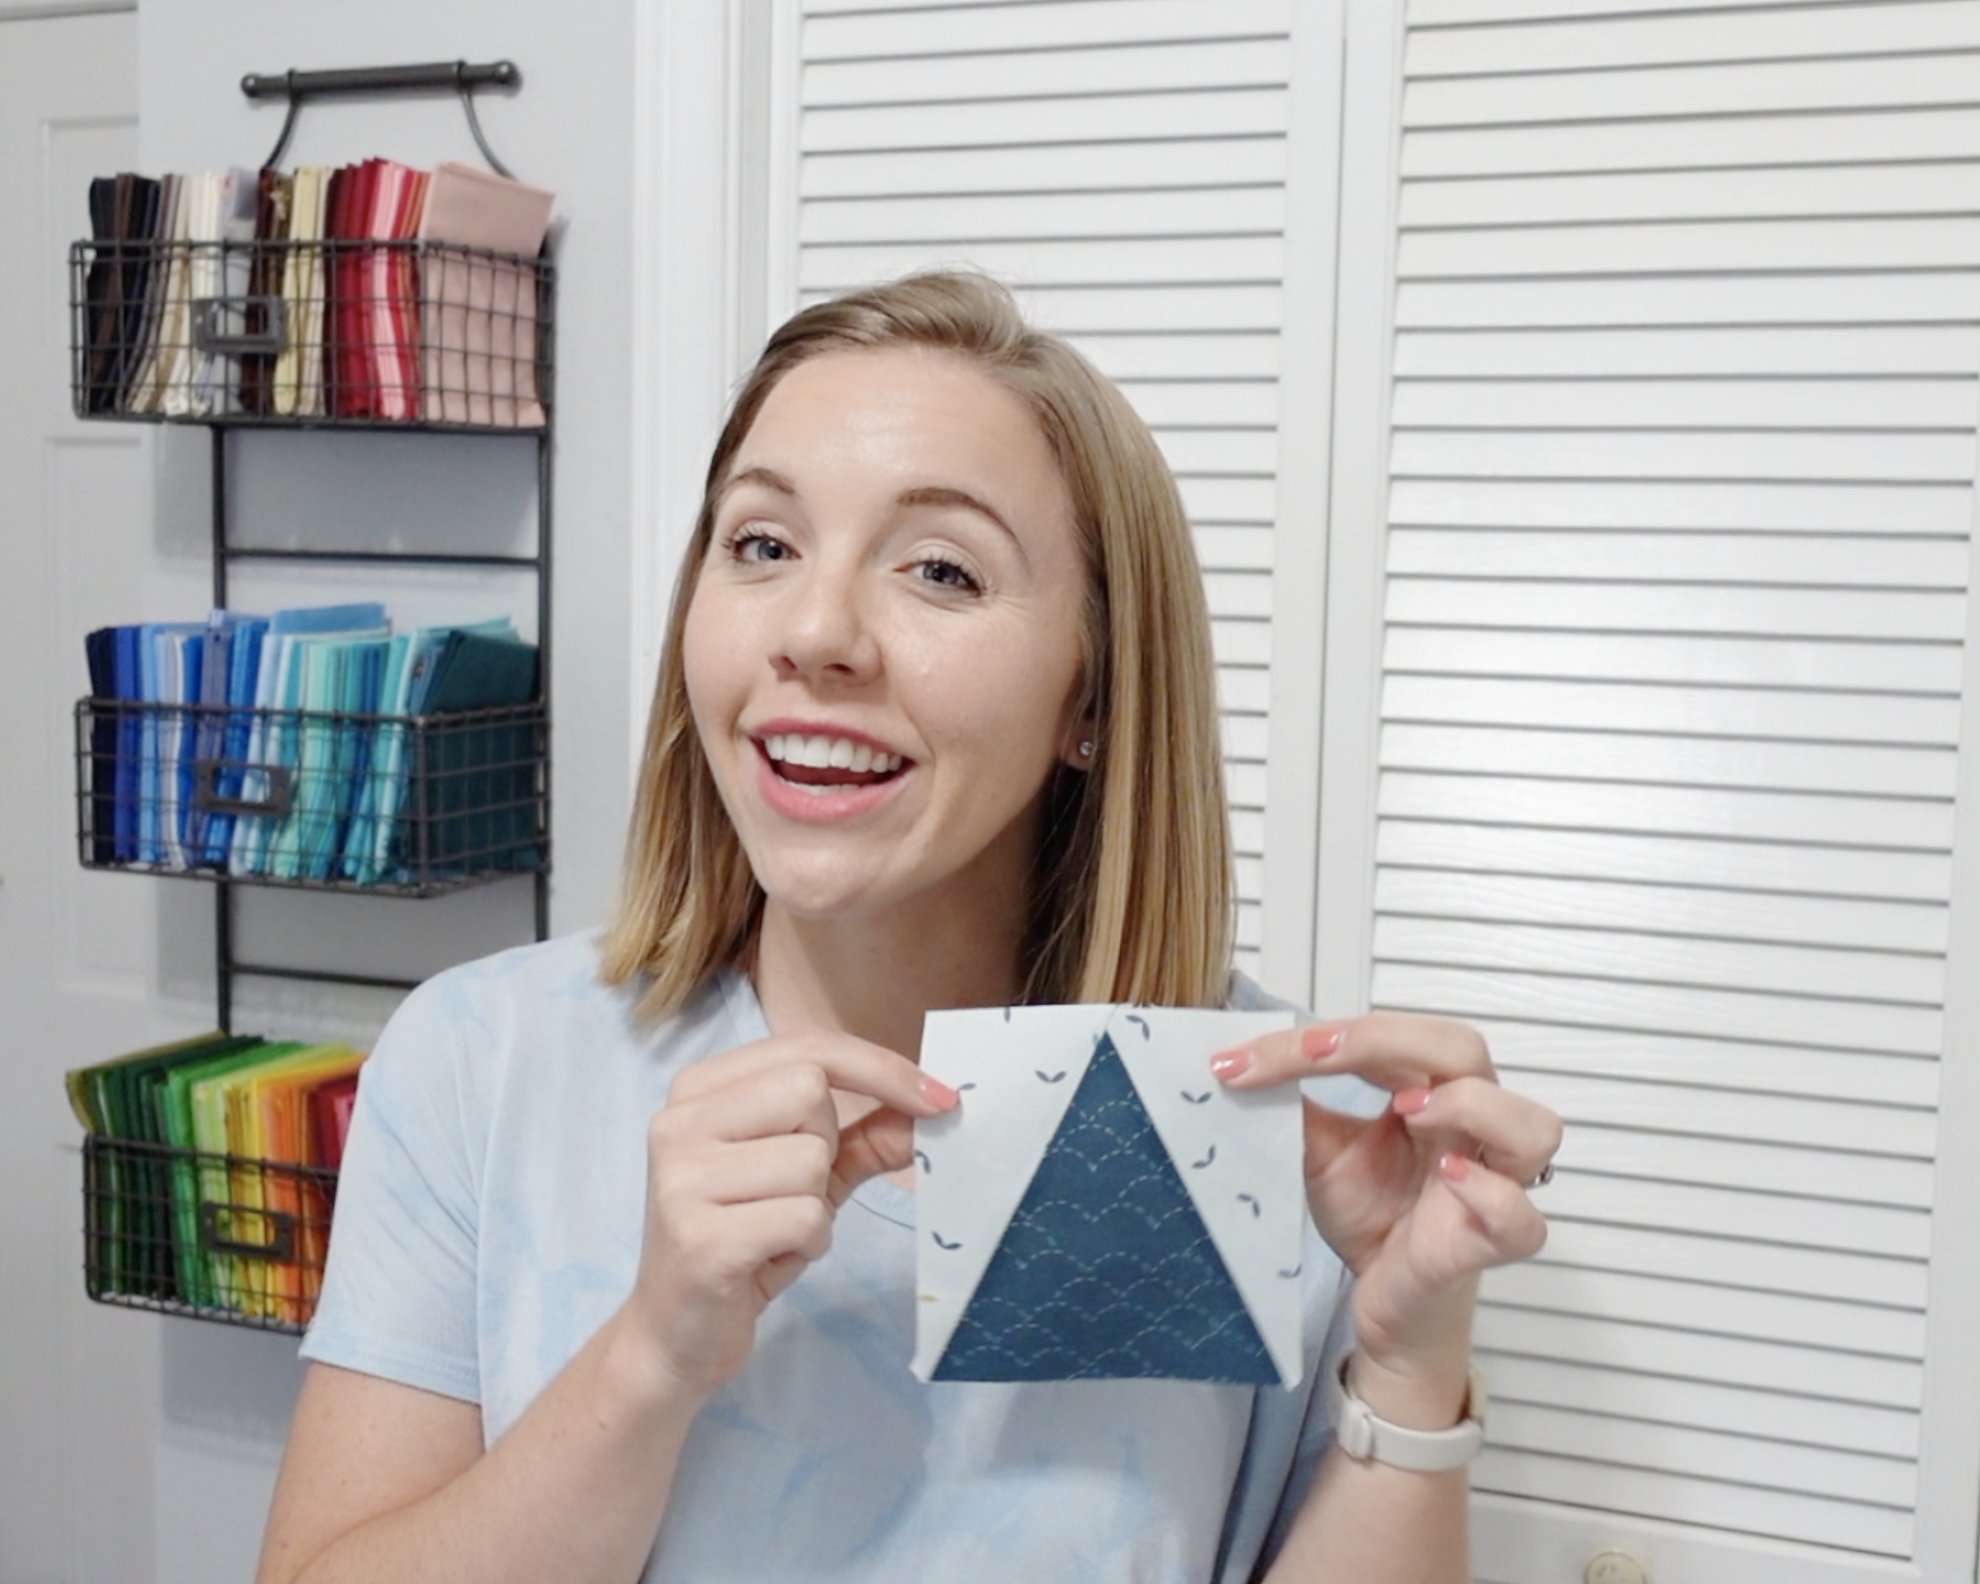 How to Make Triangle in a Square Quilt Blocks